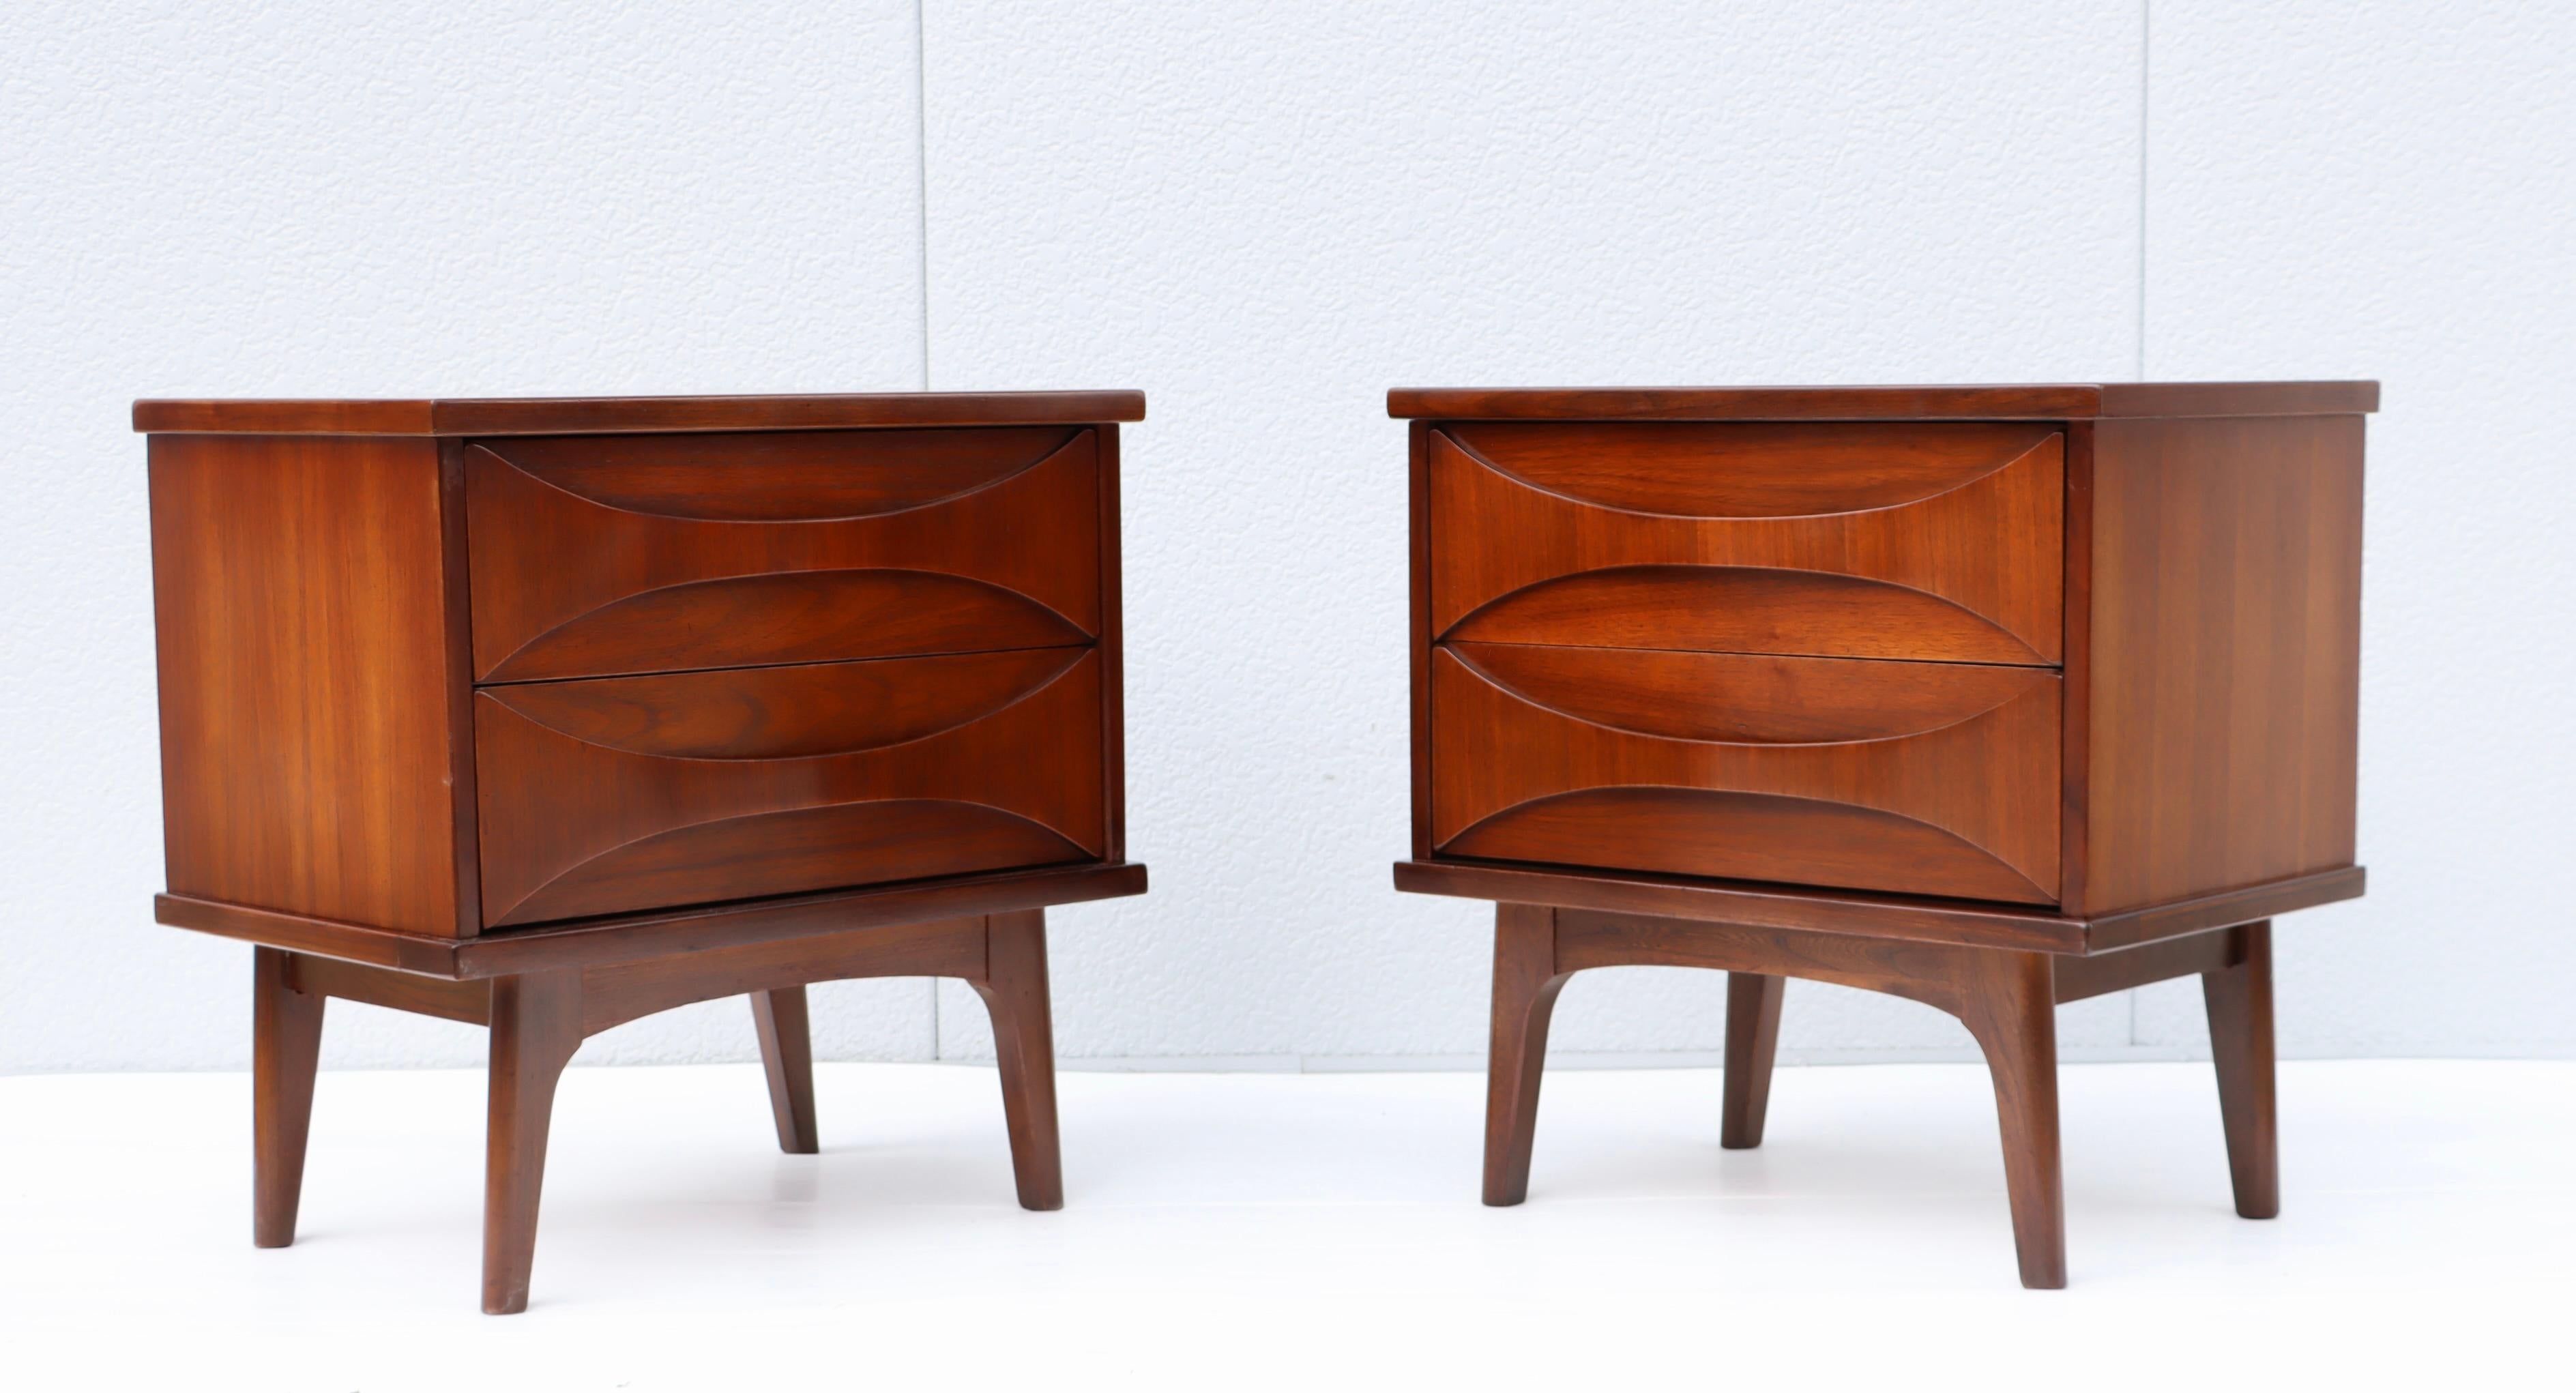 1960's modern sculptural handles walnut night stands, lightly restored with minor wear and patina due to age and use.